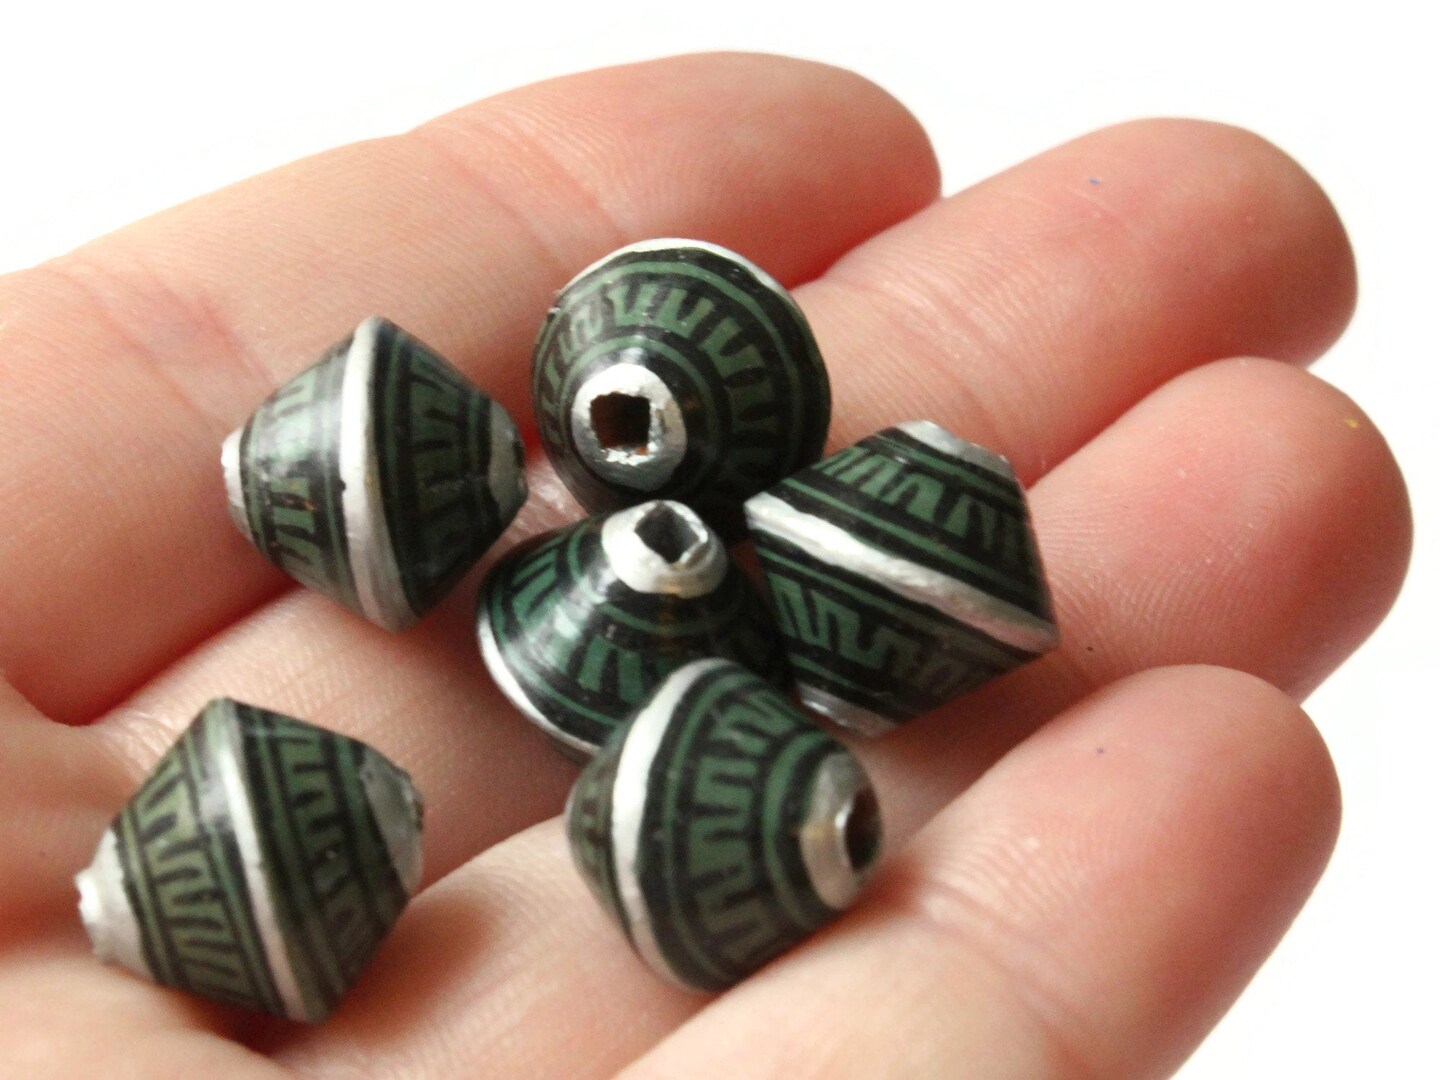 6 12mm Vintage Painted Peruvian Clay Beads - Green Silver and Black Patterned Bicone Beads